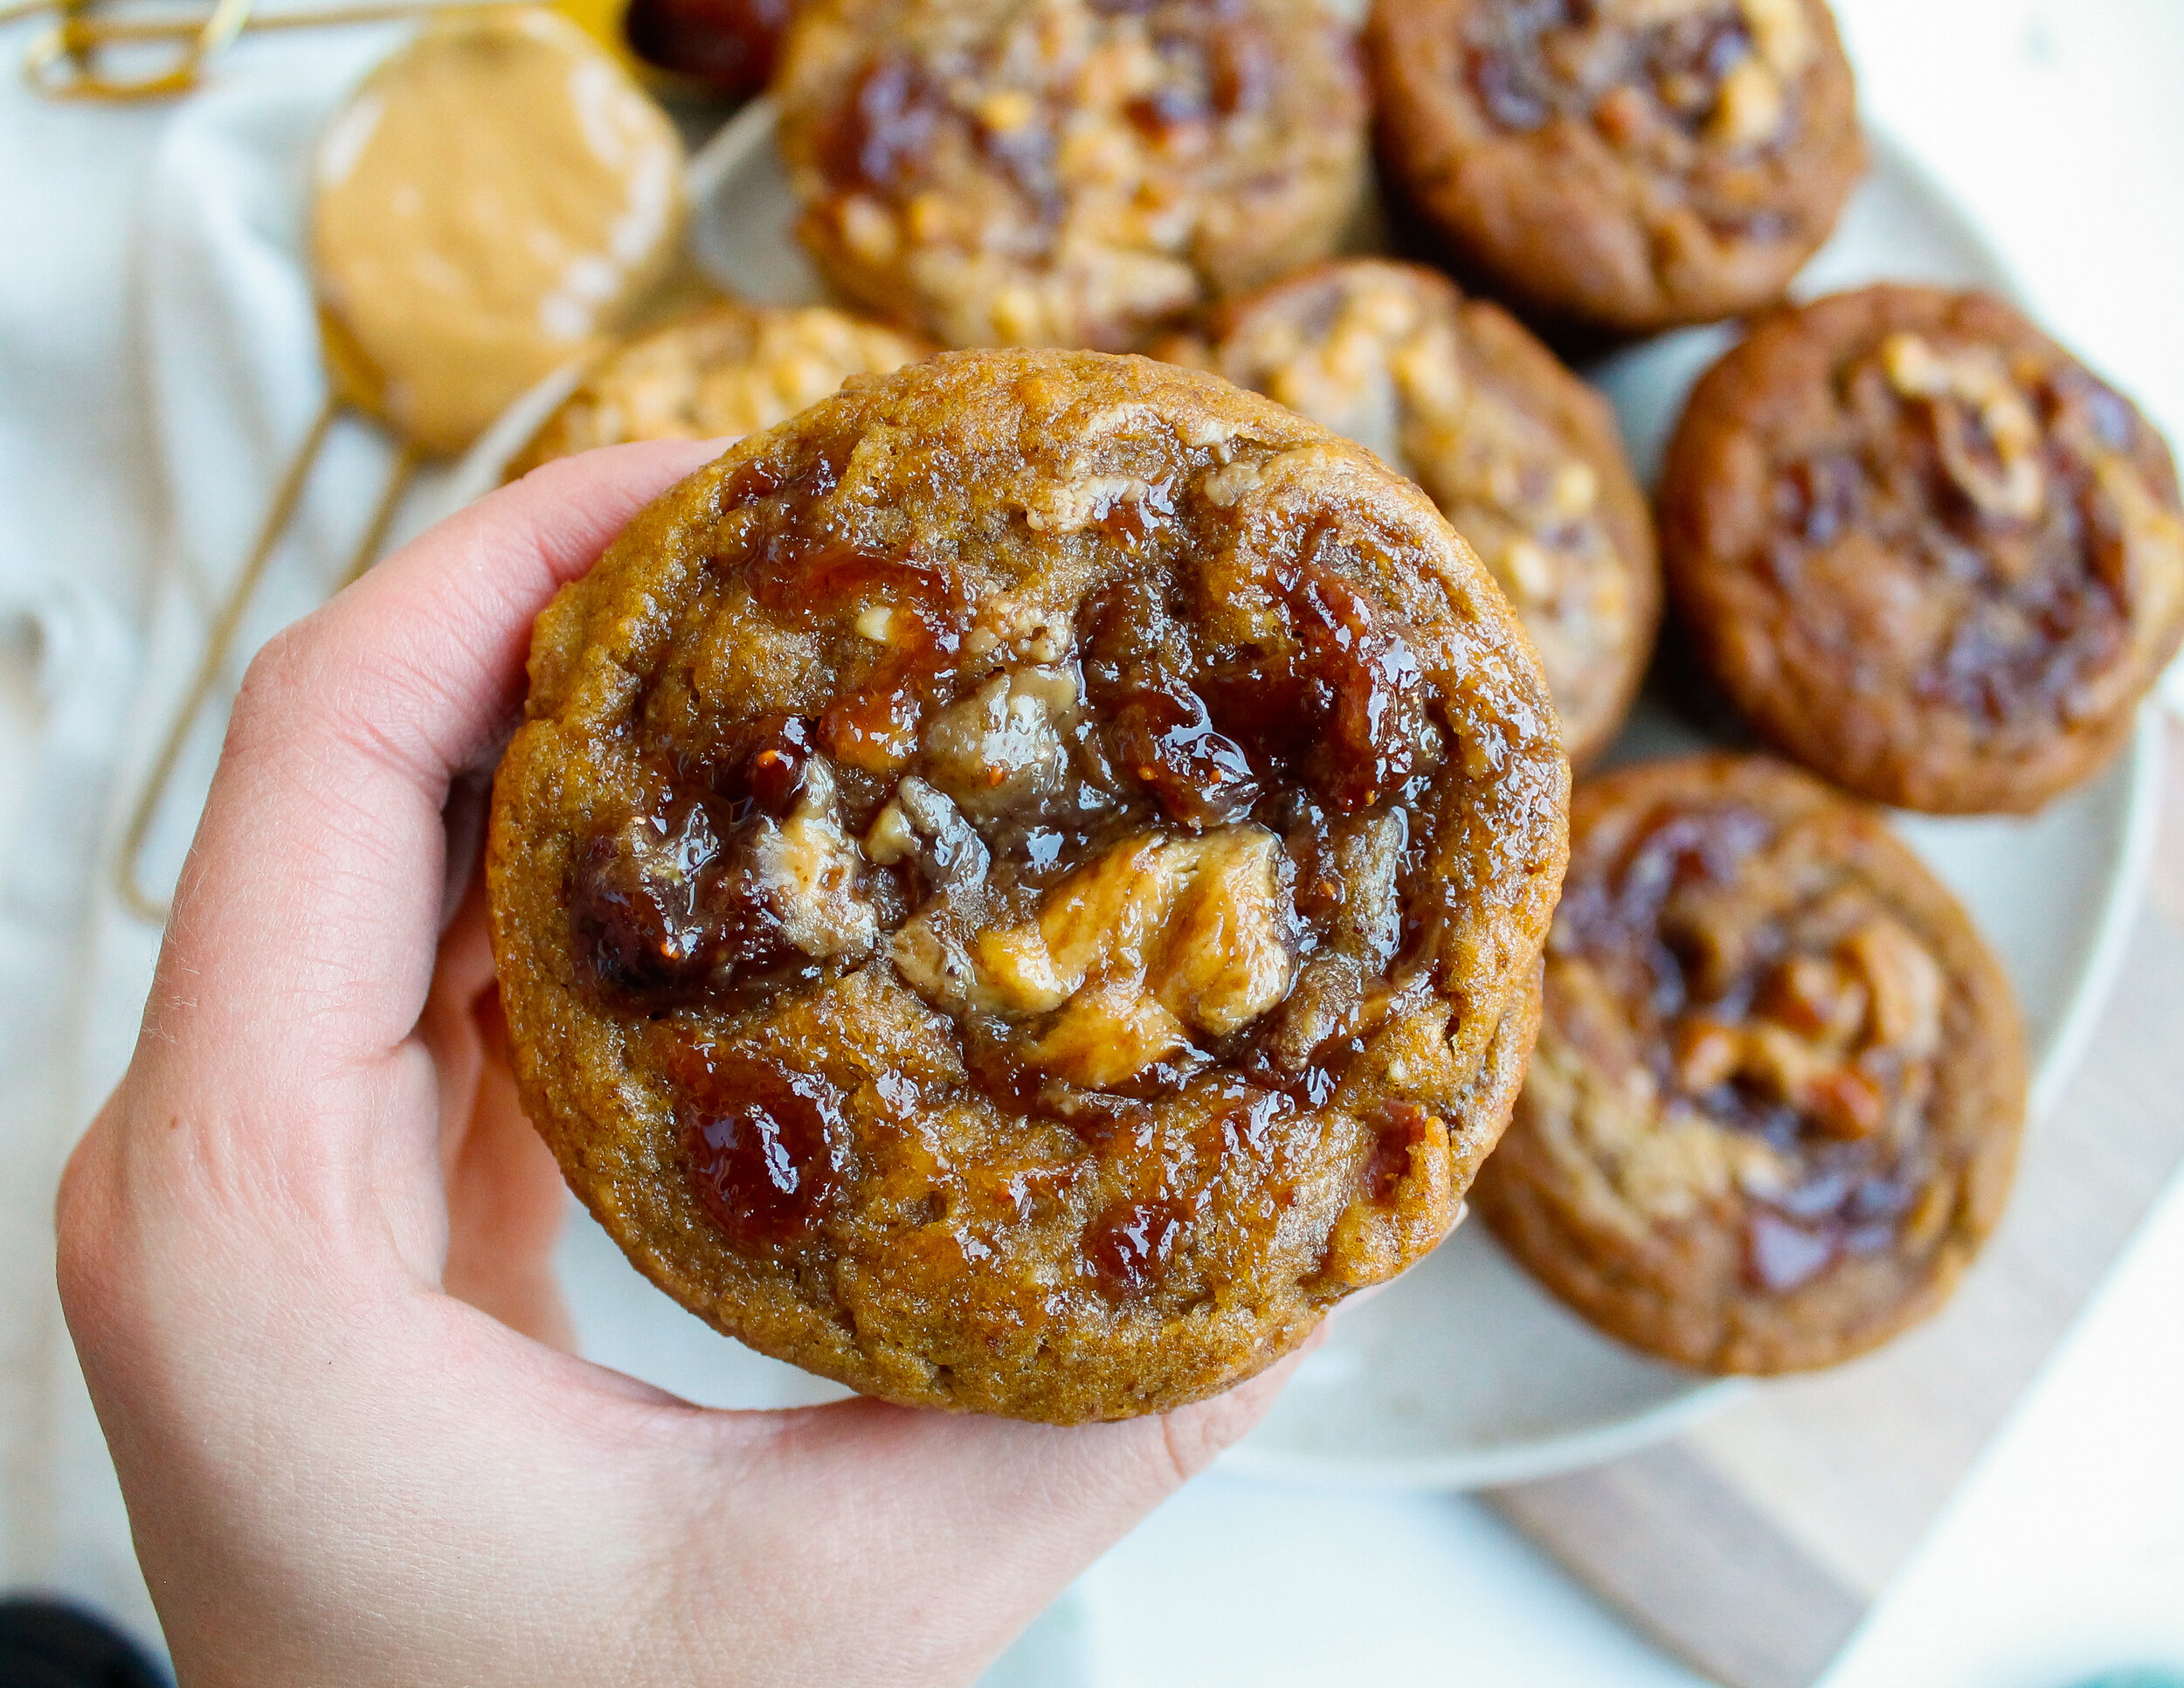 Grain Free Peanut Butter and Jelly Muffins